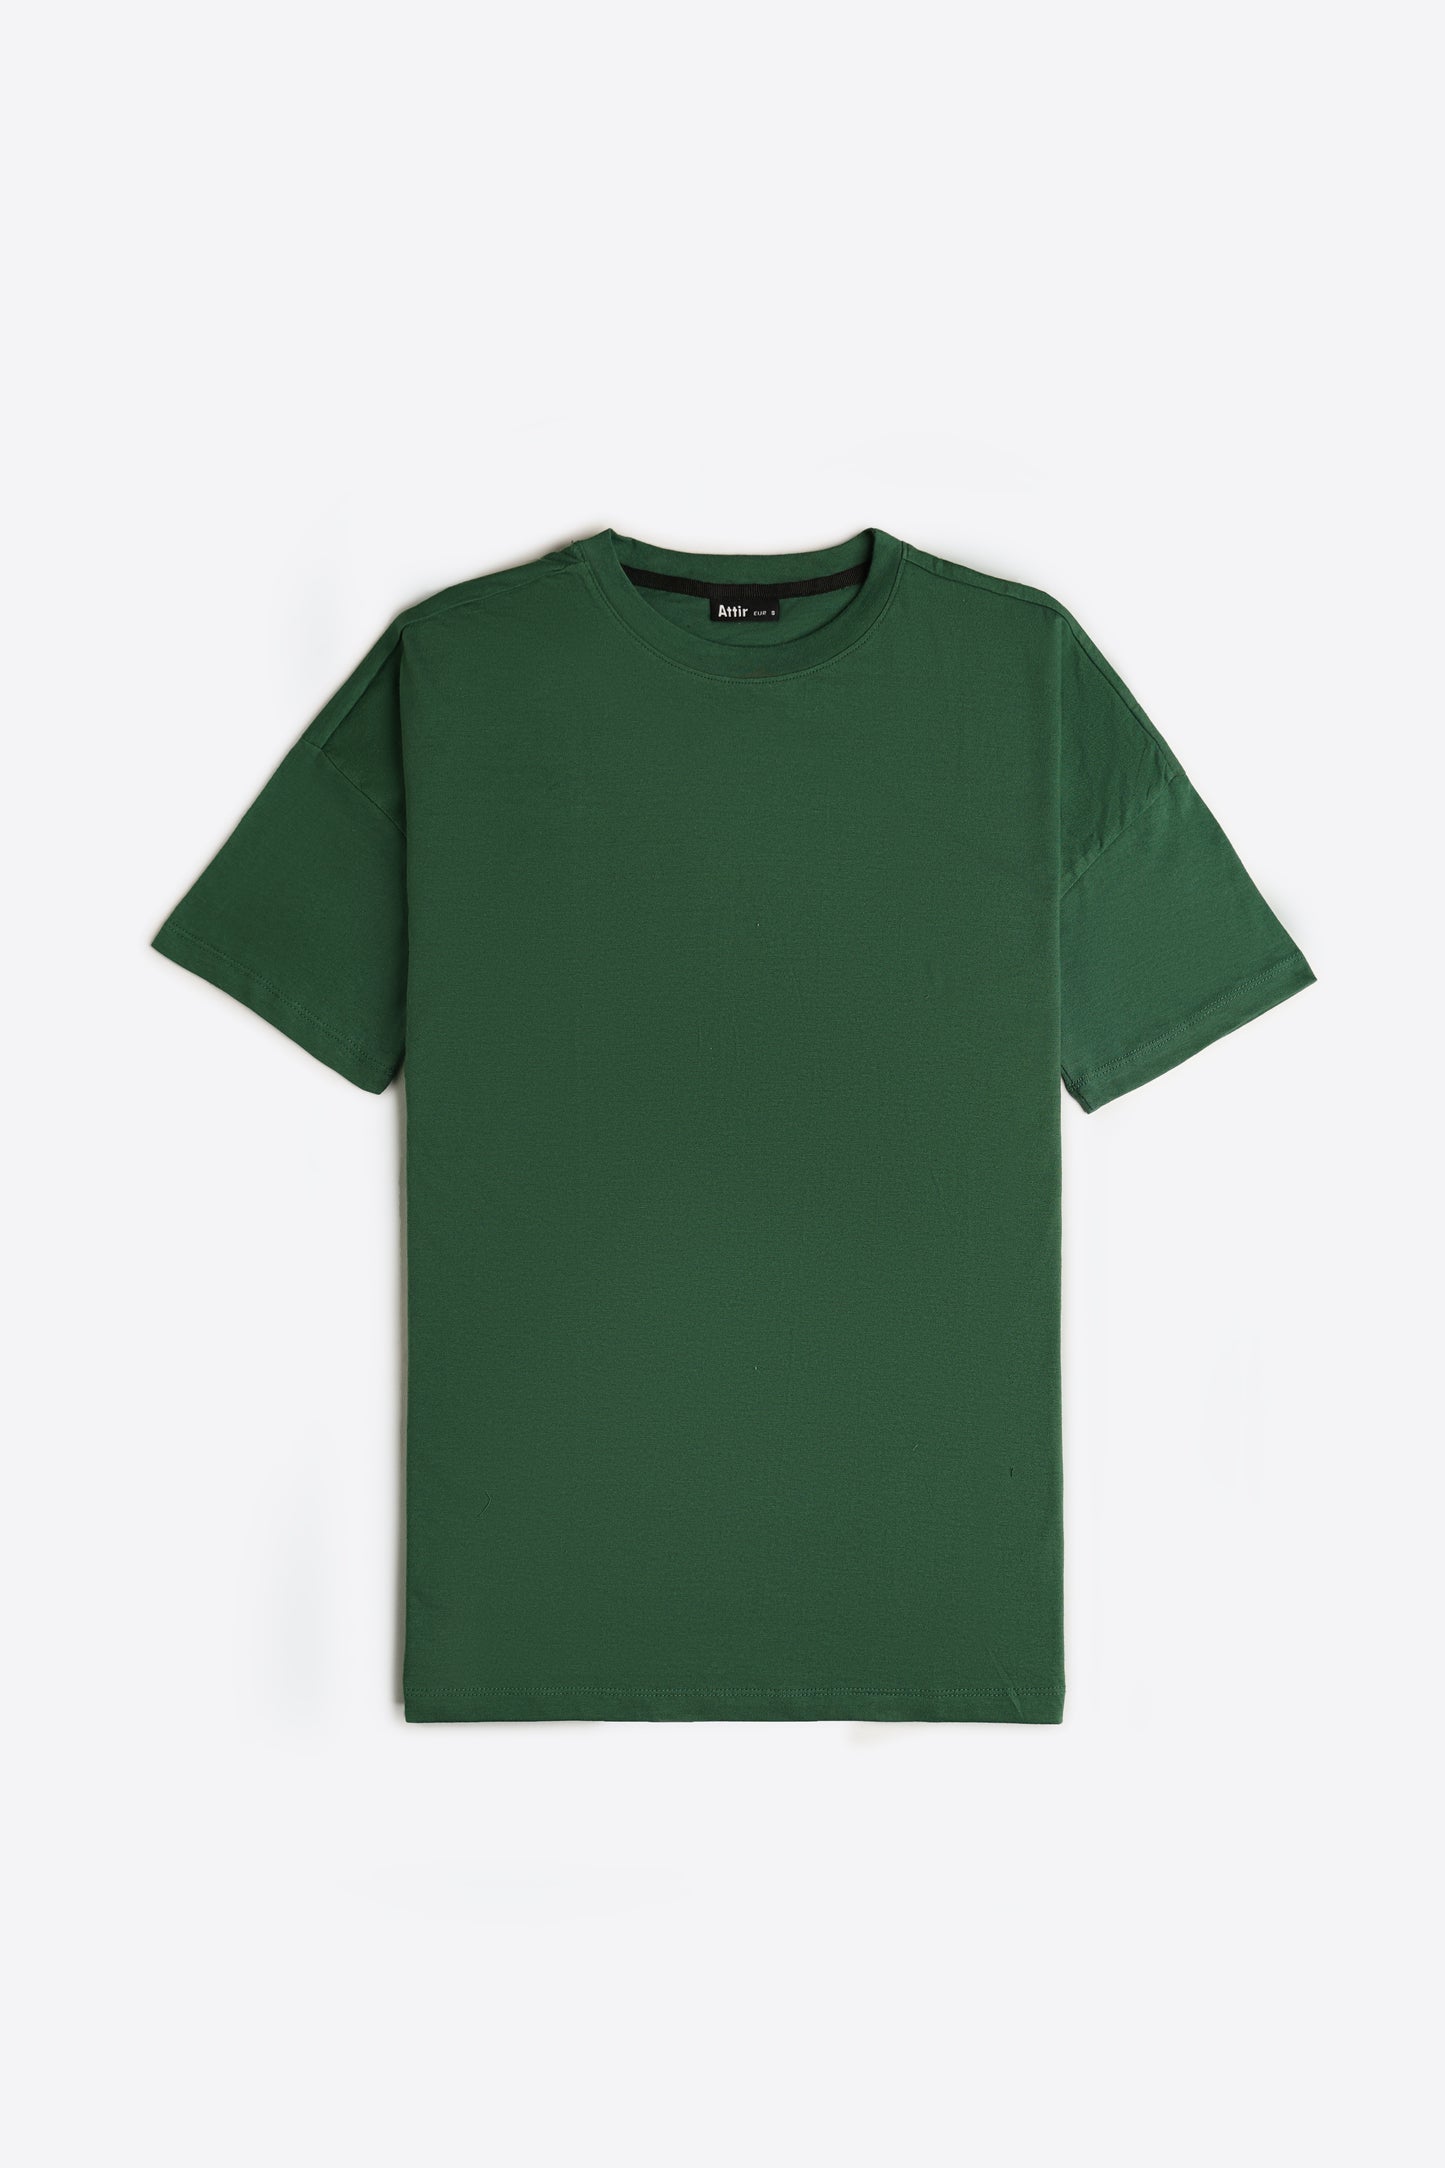 Oversized T-shirt in Forest Green